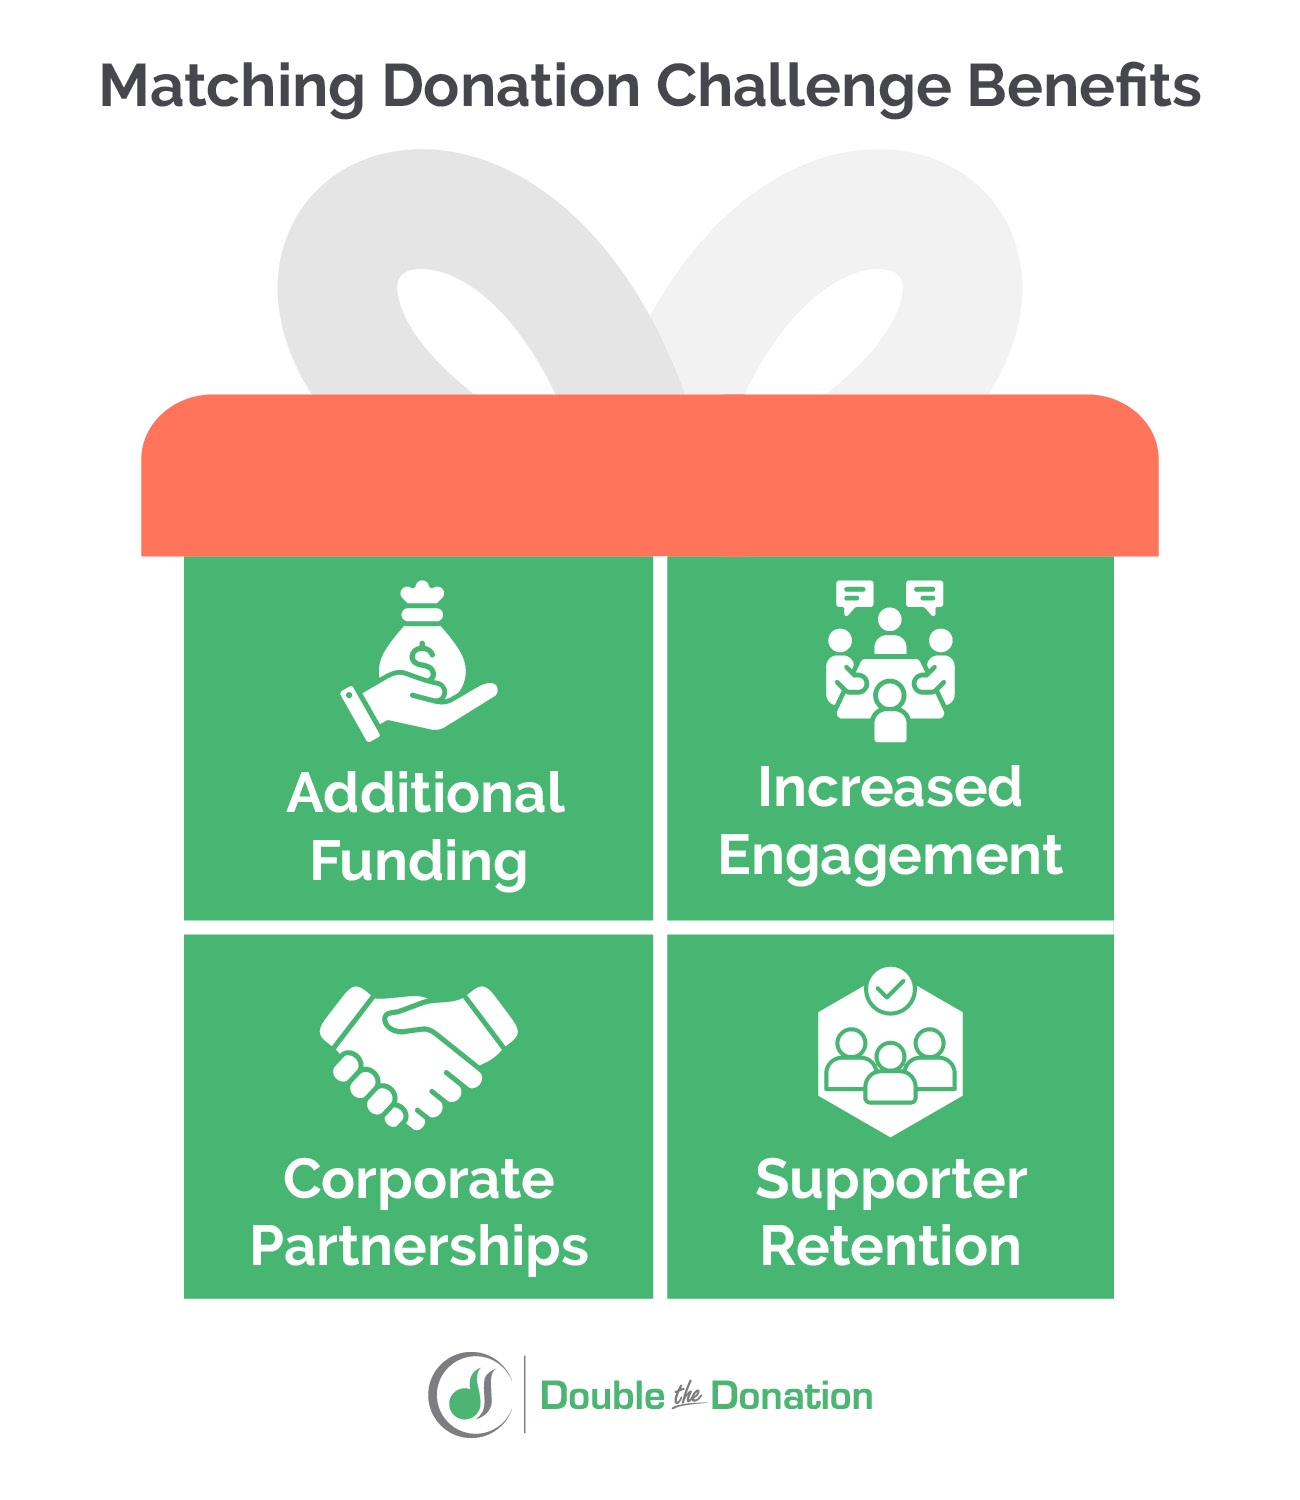 This image lists the benefits of matching donation challenges, also covered by the text below.